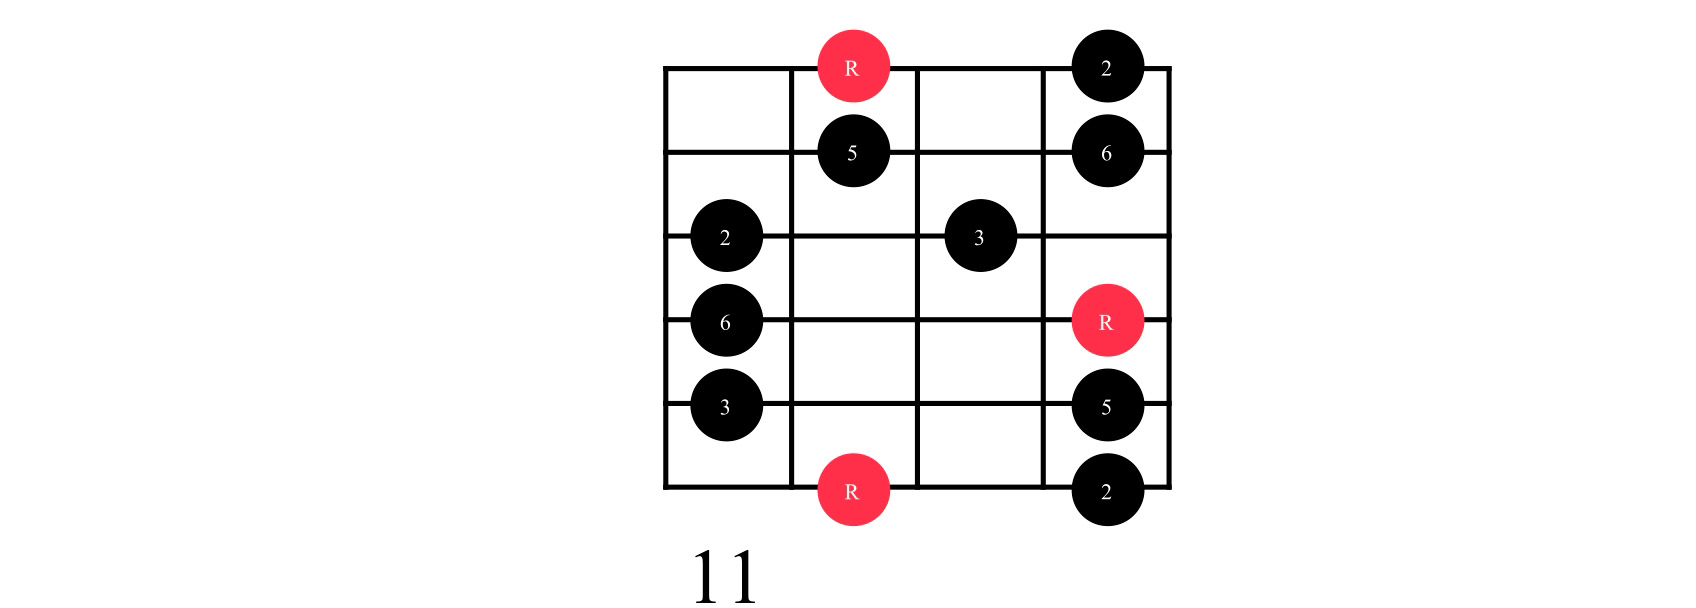 Guitar chord diagram showing E Major Pentatonic Box 2, with the root notes (R) highlighted in red and fret numbers labeled, illustrating the fingering positions on the fretboard.